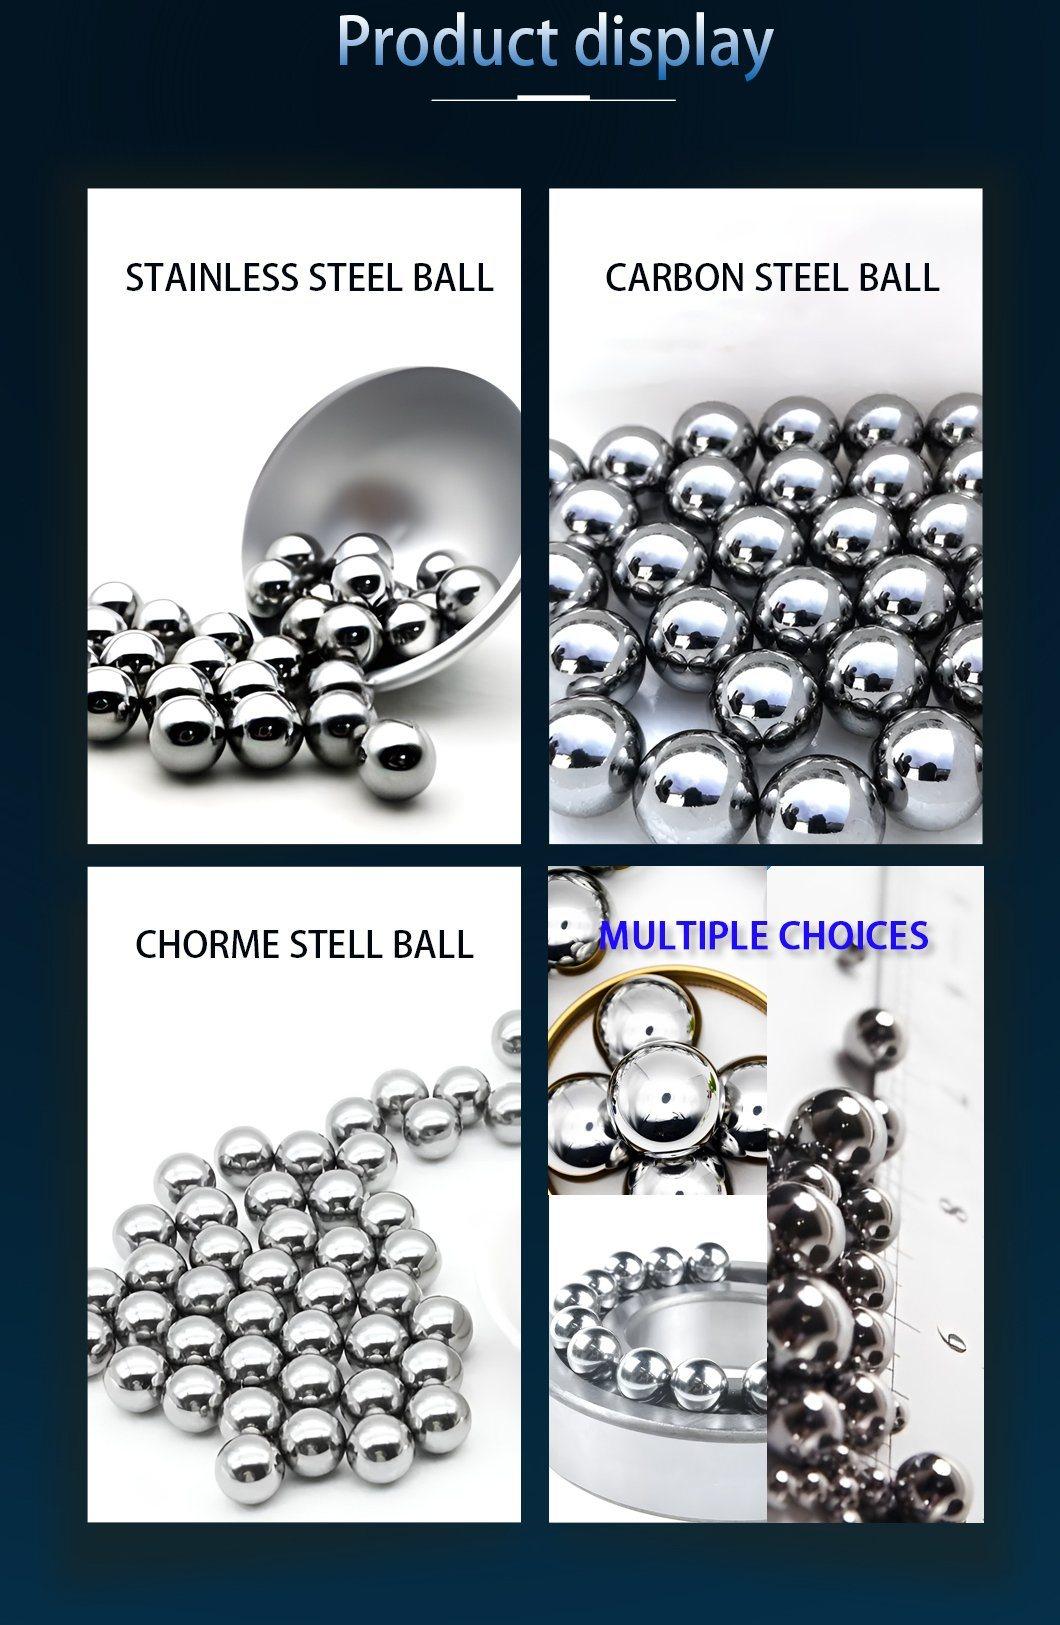 Wholesale 316 Stainless Steel Ball 2/3/4/5/6/7/8/9/10/11/12/15/20/25mm High Quality Anti-Rust Steel Ball